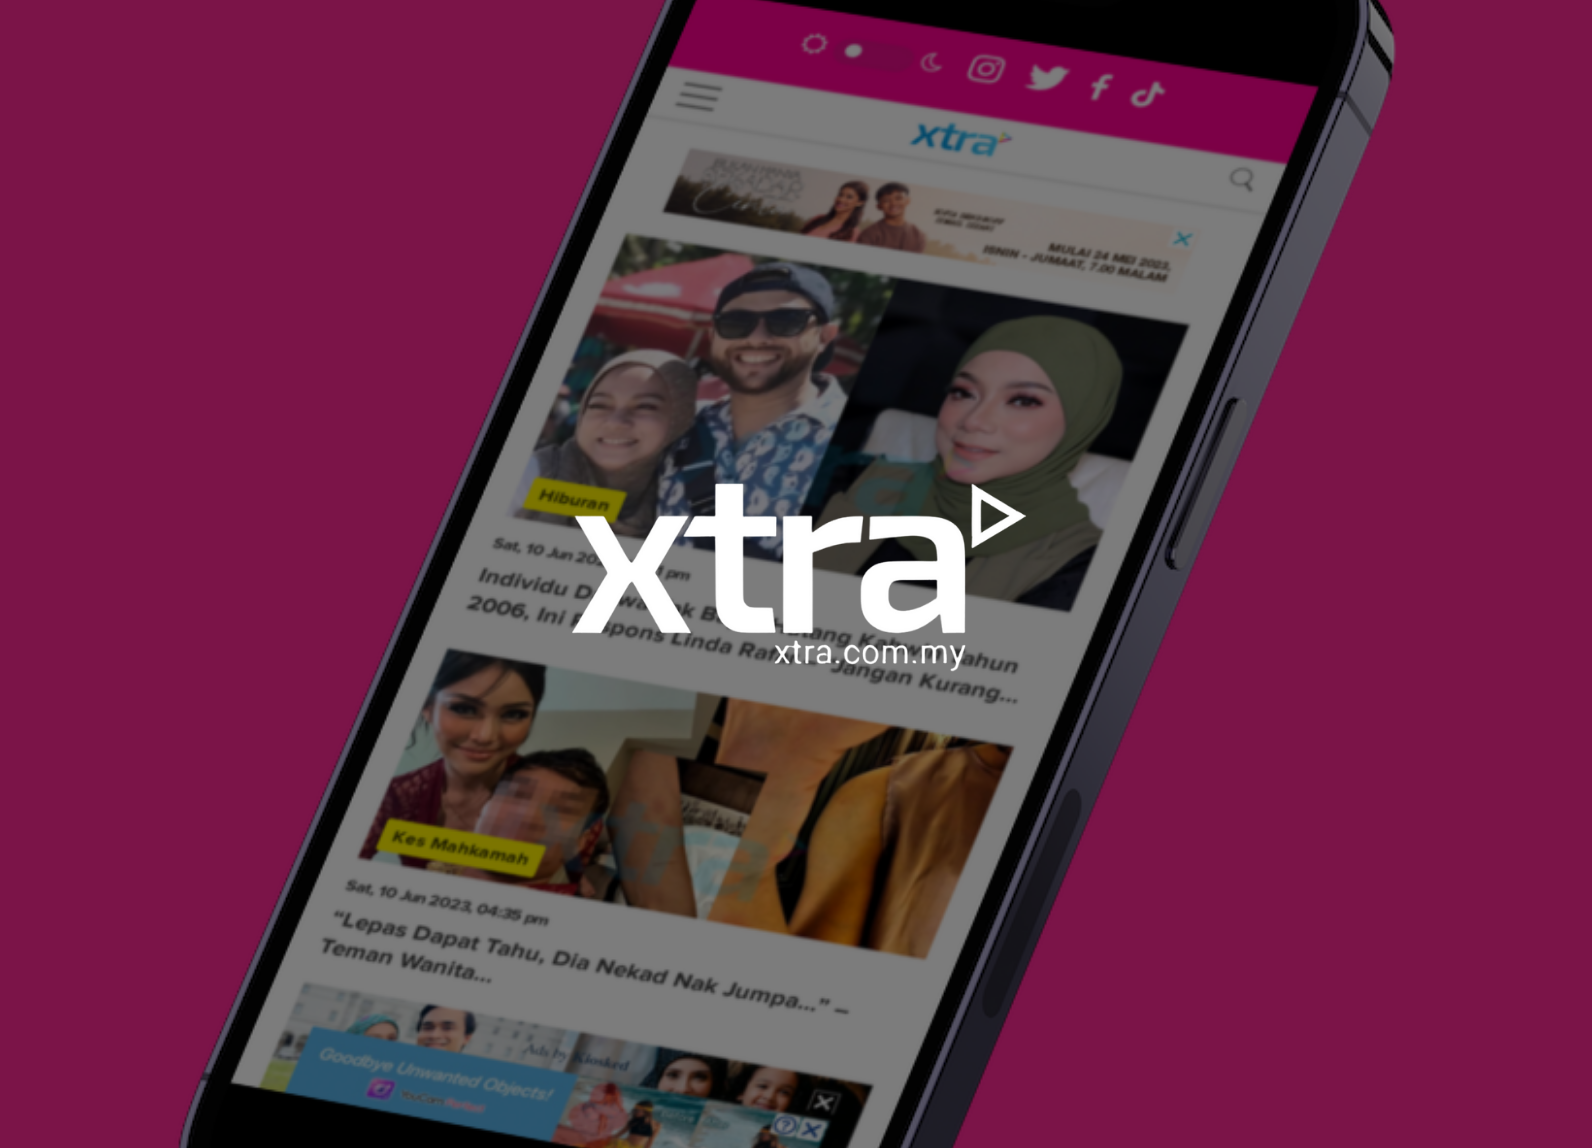 Xtra: Immersive Entertainment News Hub for the Next Generation for tonton